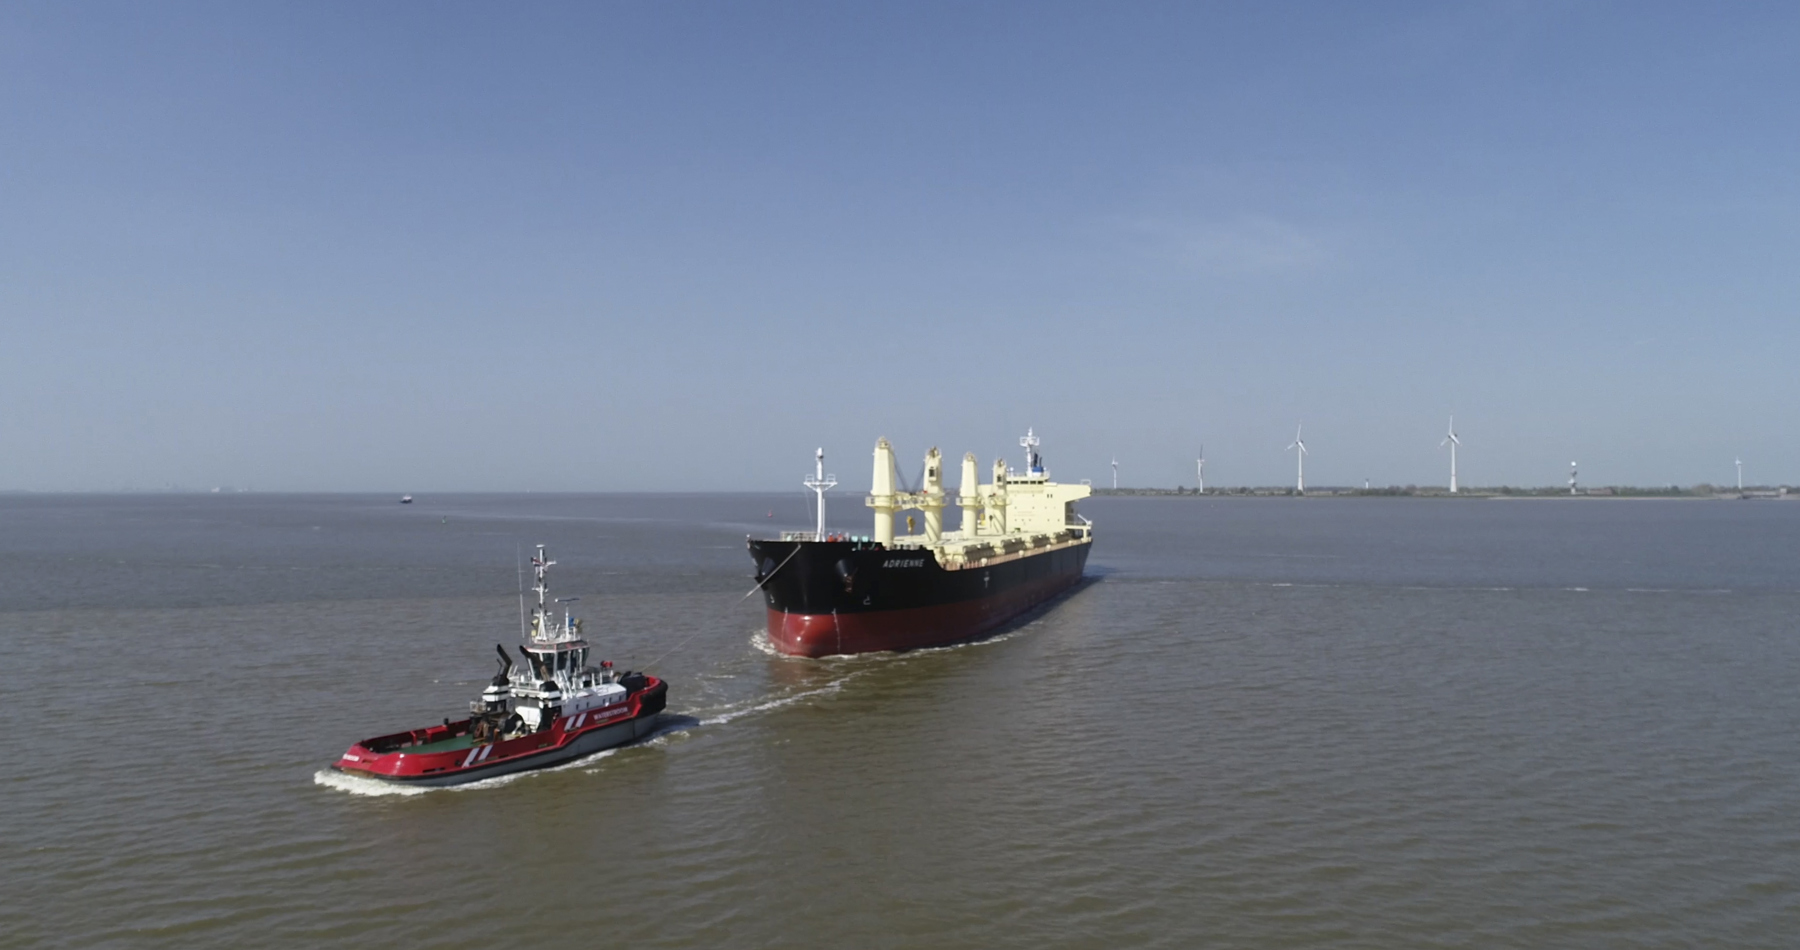 Tug assistance and agency service for MV Adrienne in the port of Delfzijl